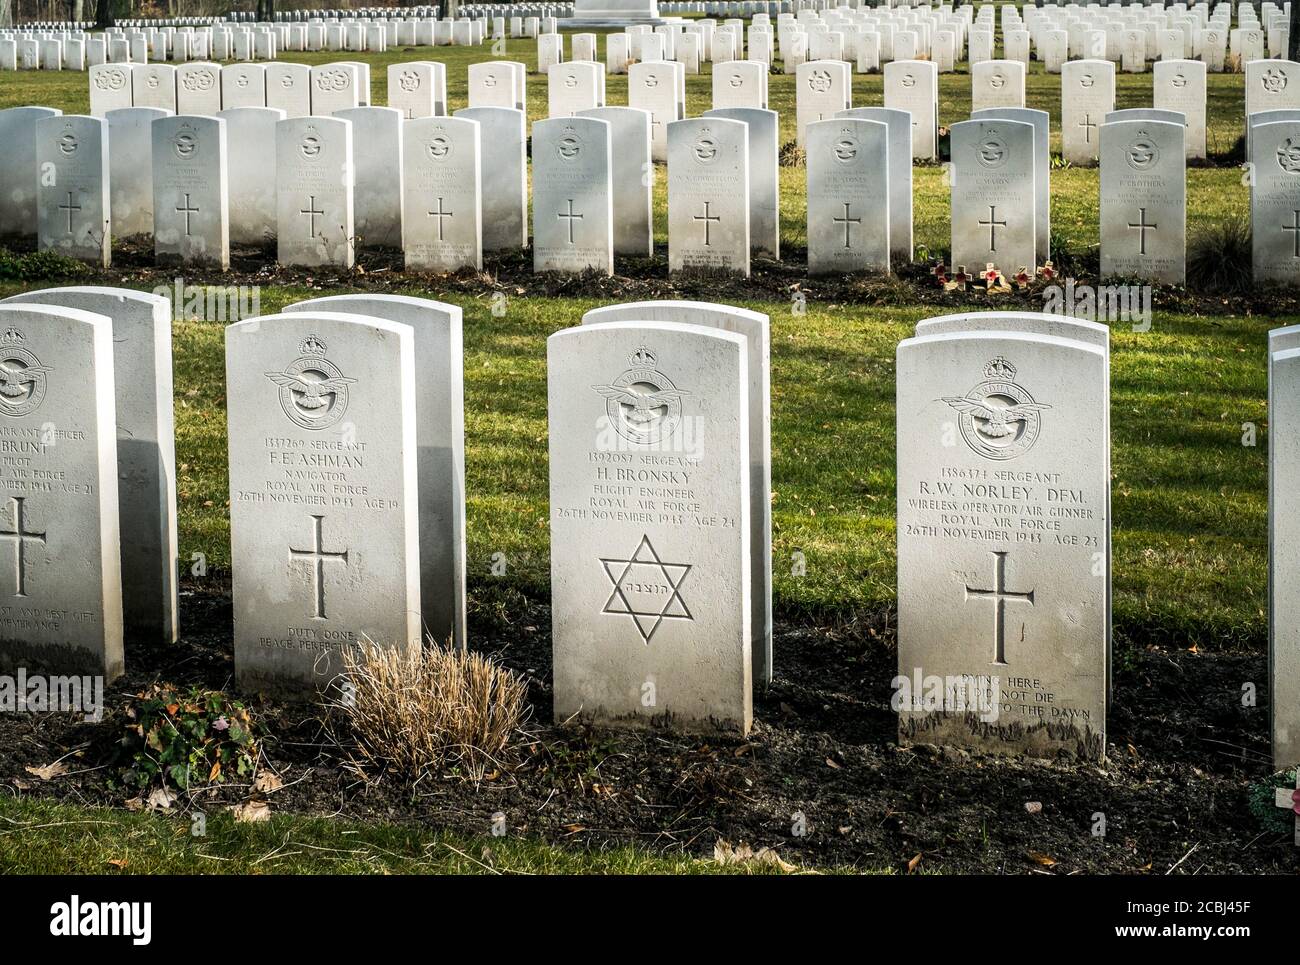 Berlin, Germany 1939 -1945 Commonwealth War Graves Commission Cemetery - Jewish Royal Air Force soldier - Star of David Stock Photo